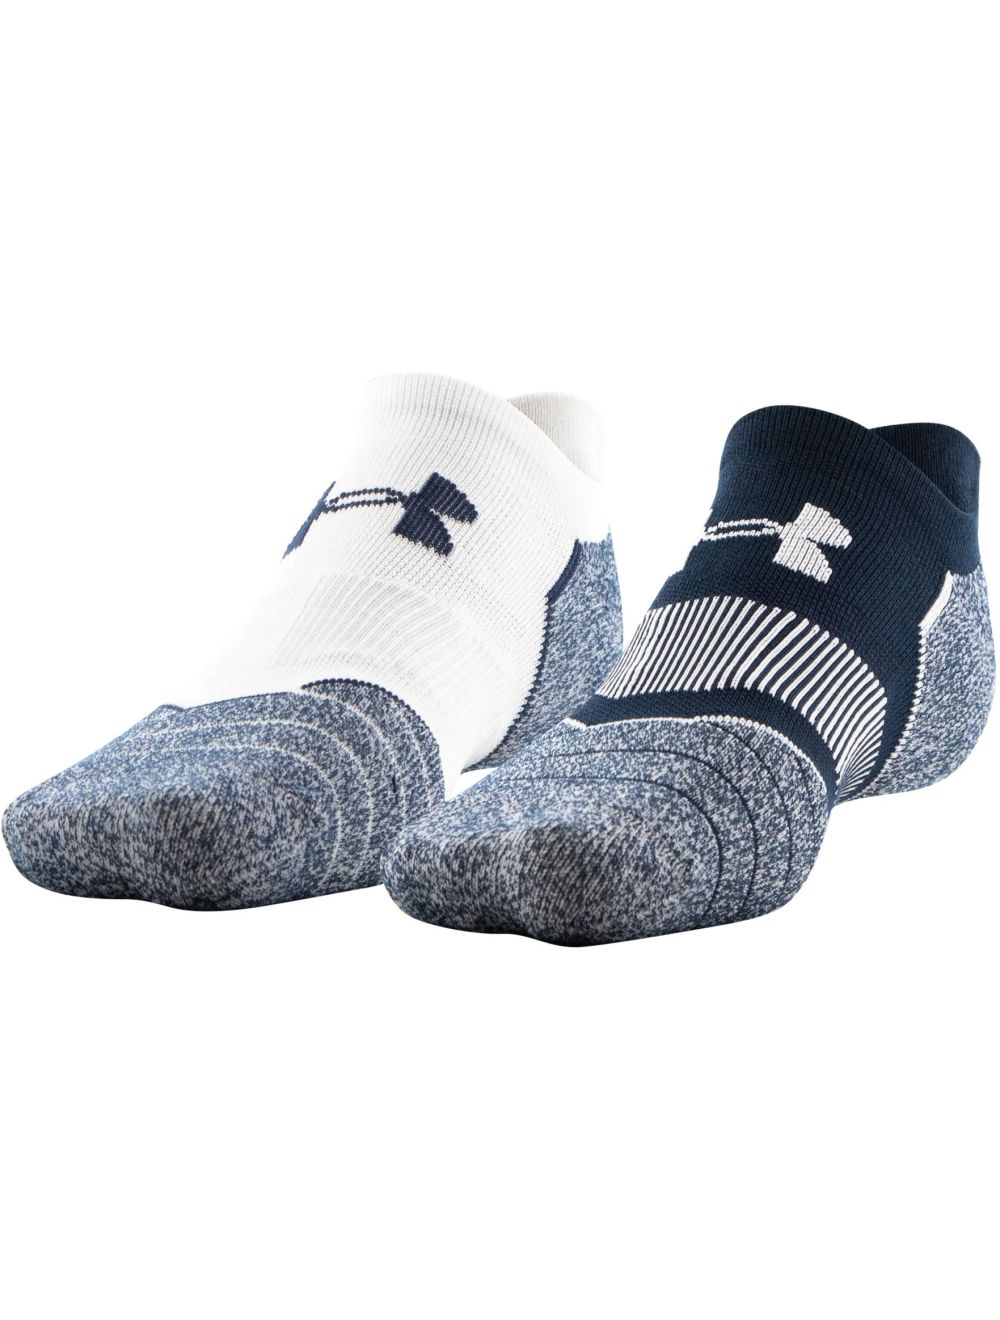 Under Armour Unisex UA Golf No Show Tab 2-Pack Socks 1371527 - Newest Arrivals